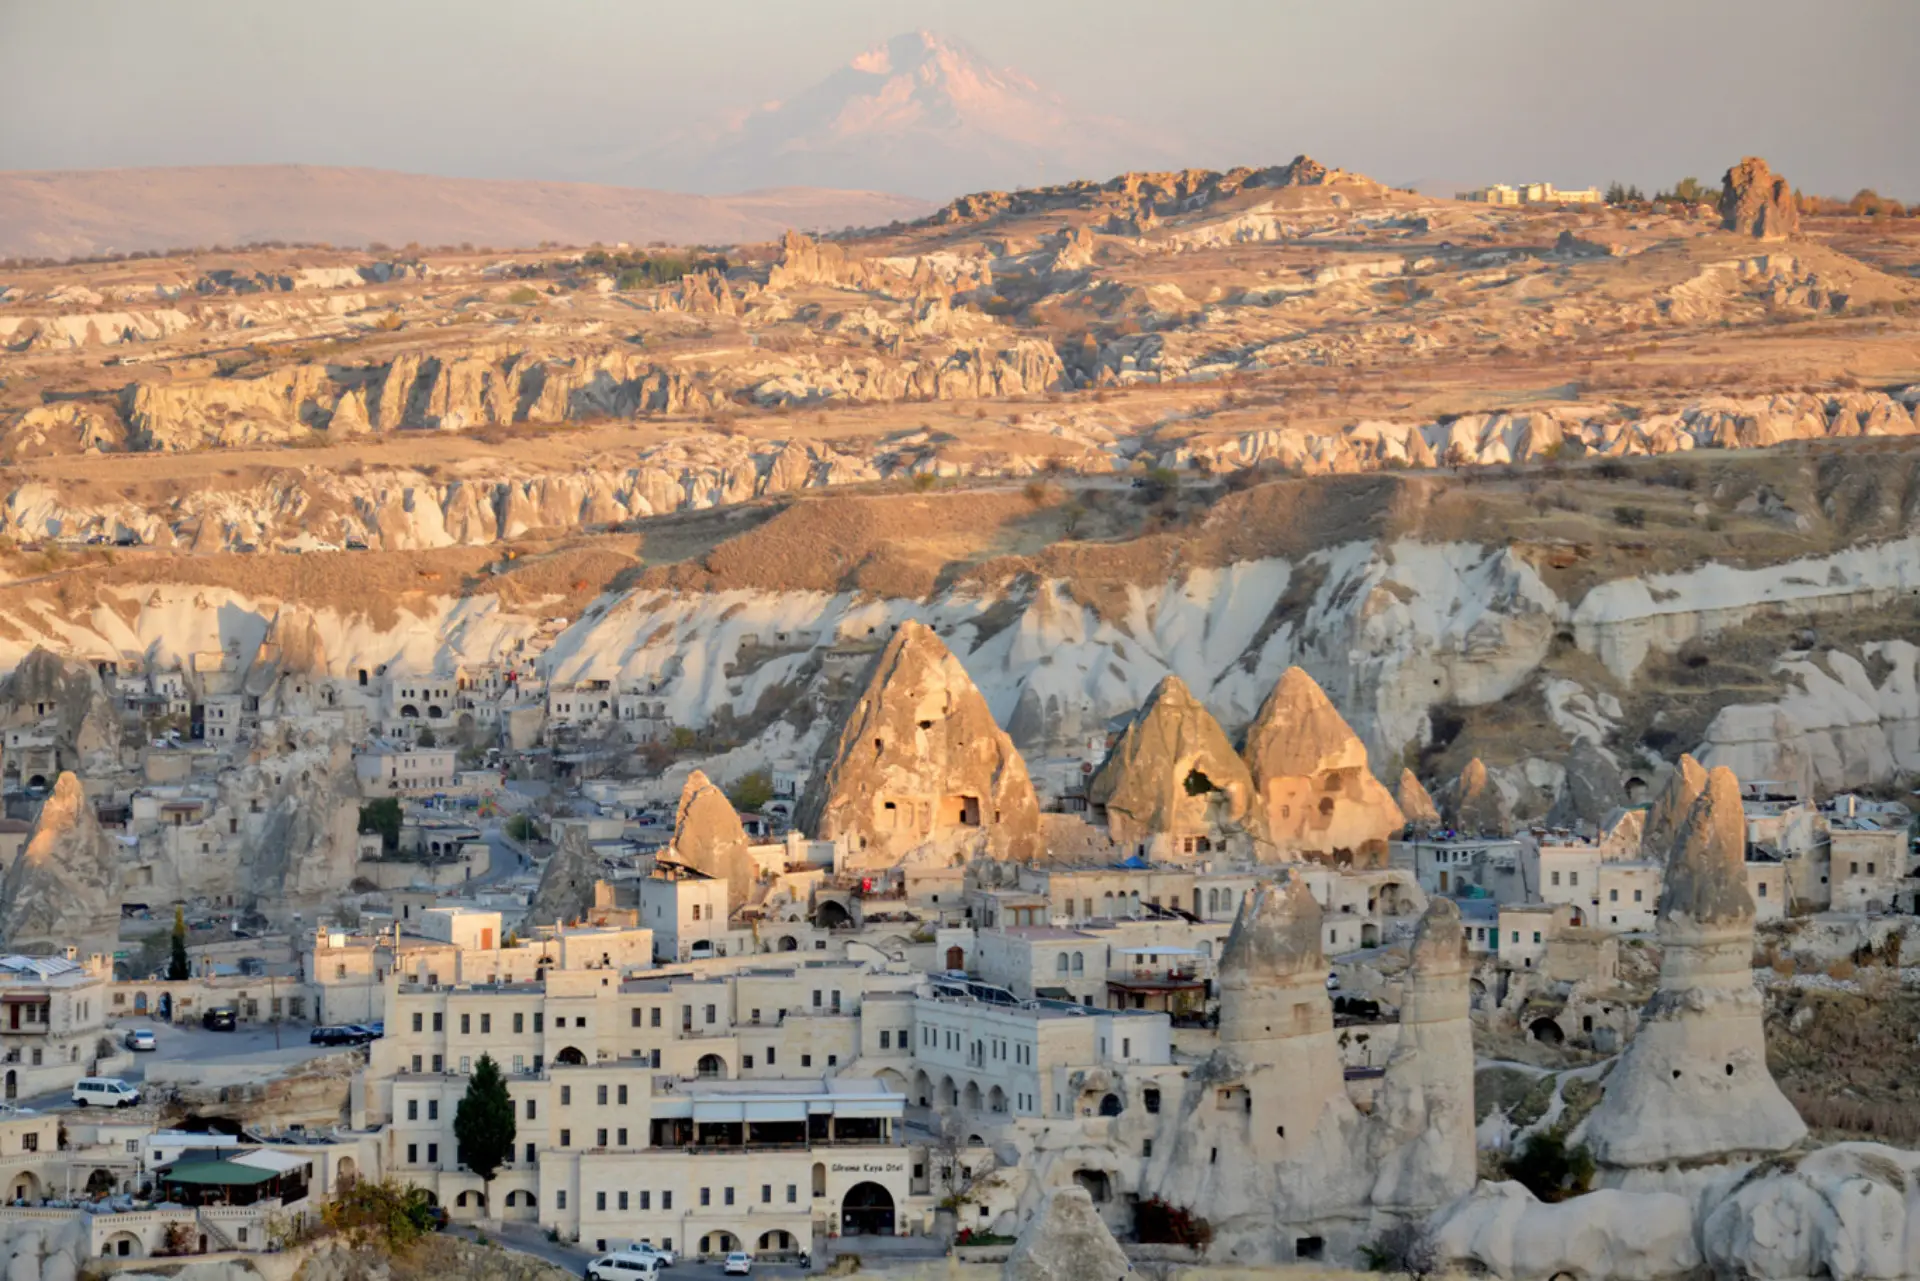 Goreme Travel Guide - Suggestions for Attractions and Places to Visit